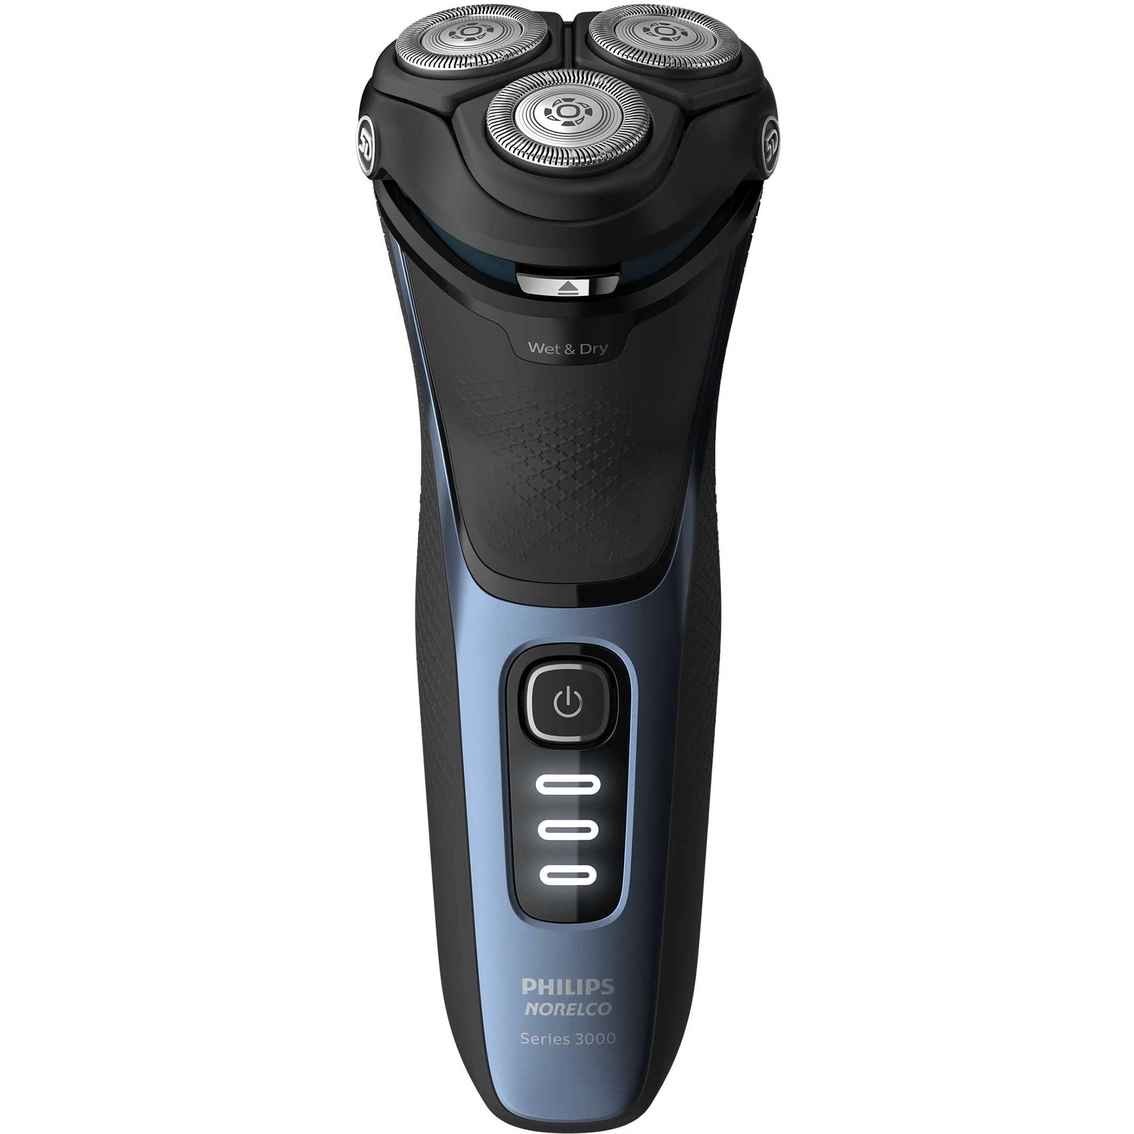 Philips Norelco 3500 Shaver - Image 3 of 10